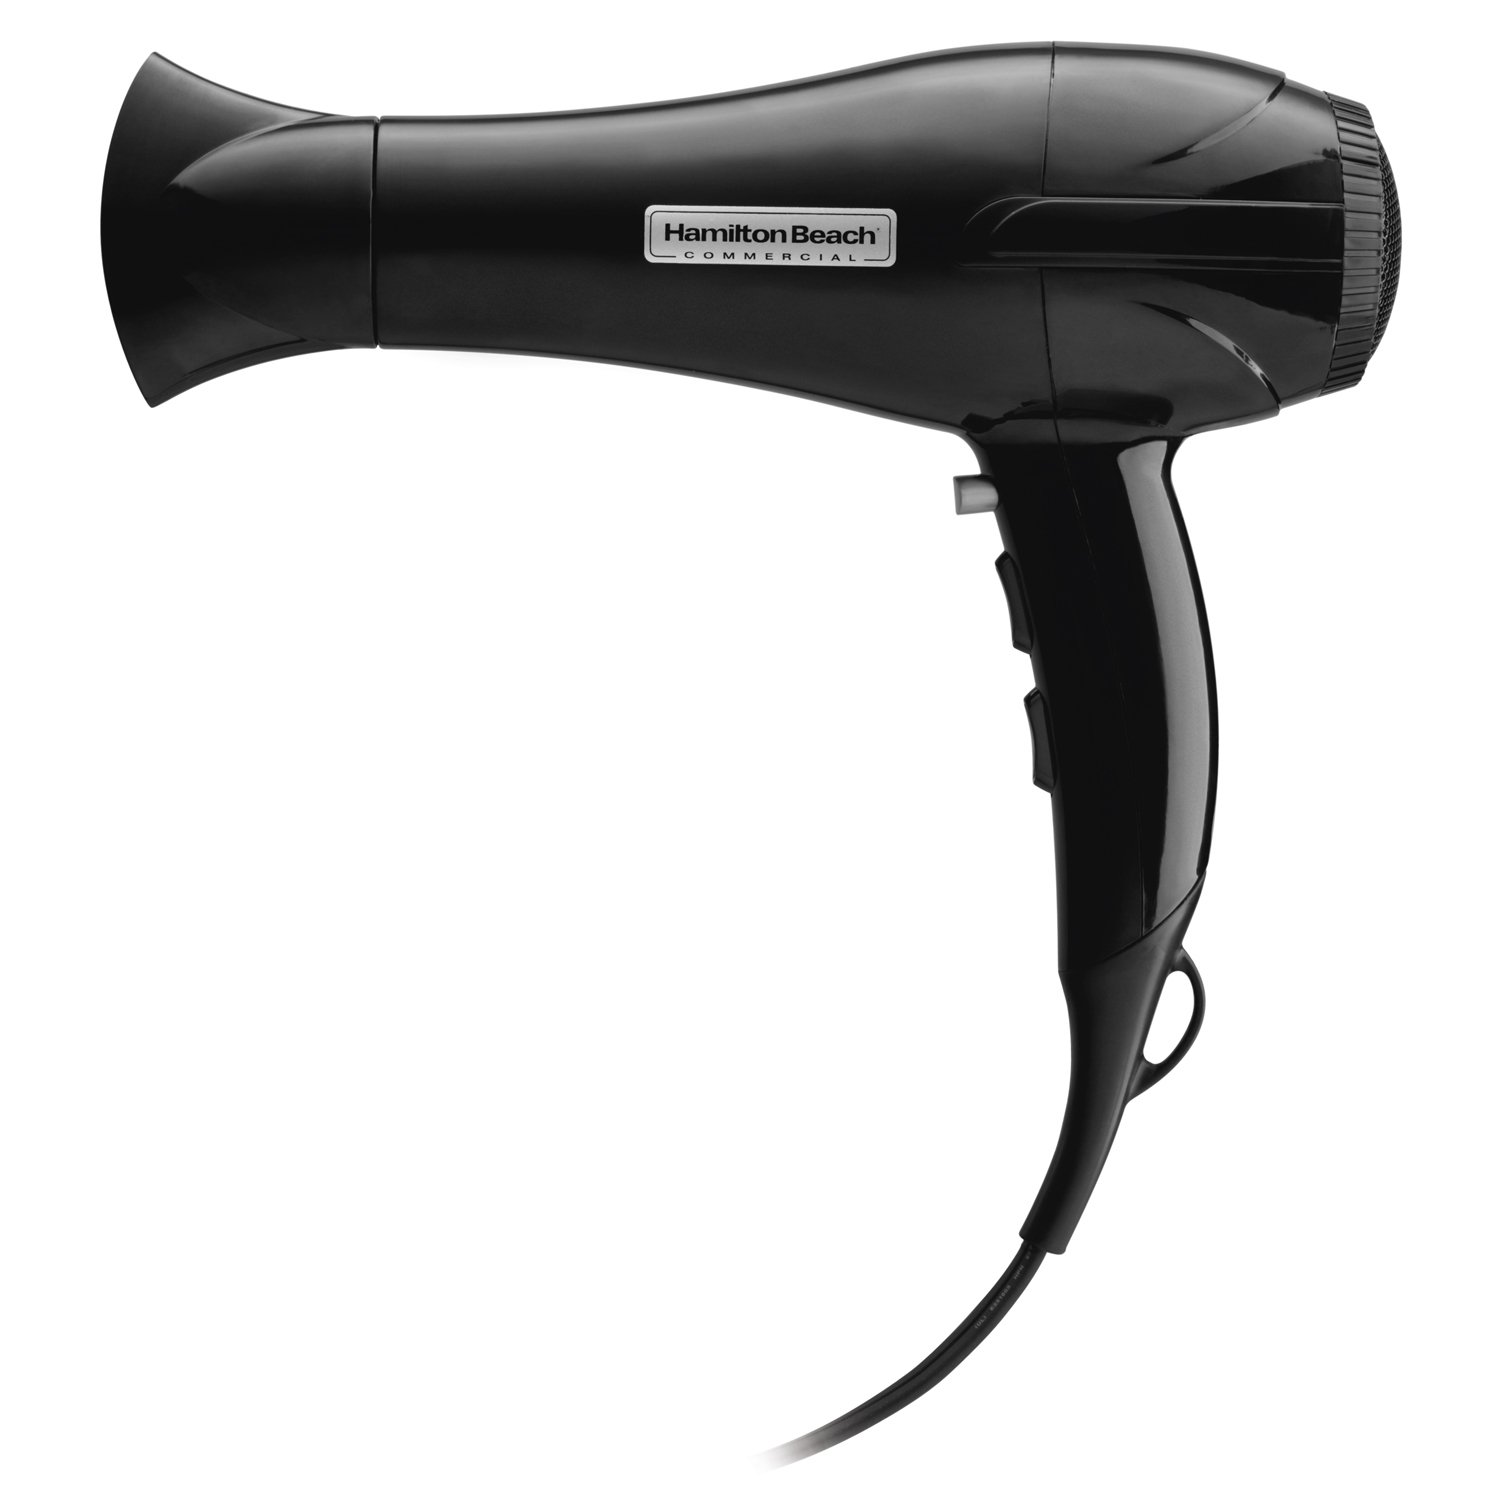 Commercial Hair Dryer for Your Hotel